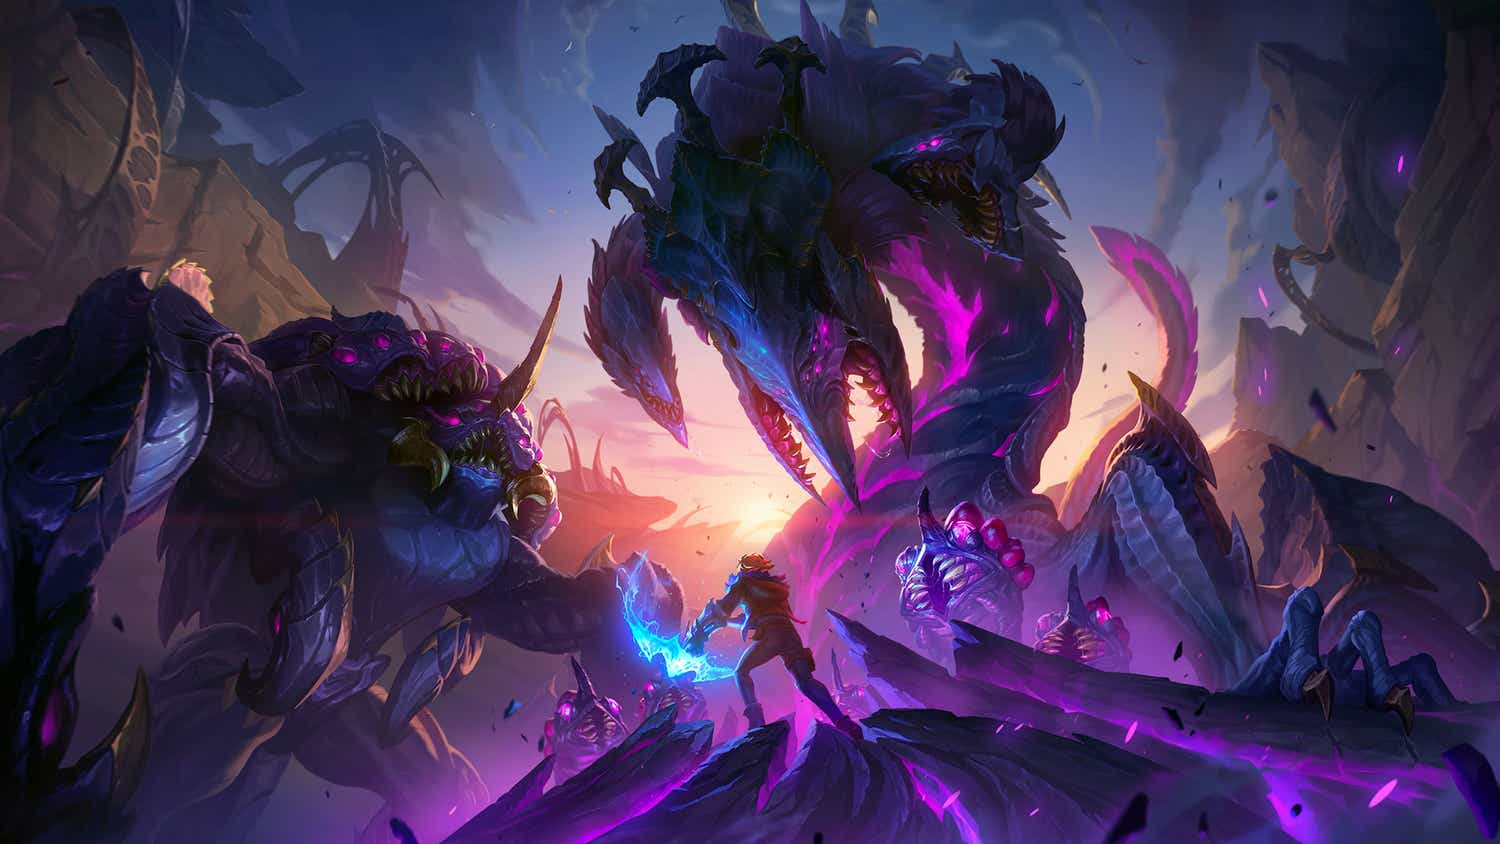 "League of Legends" Quiz: Match the Innate Passive With the Champion